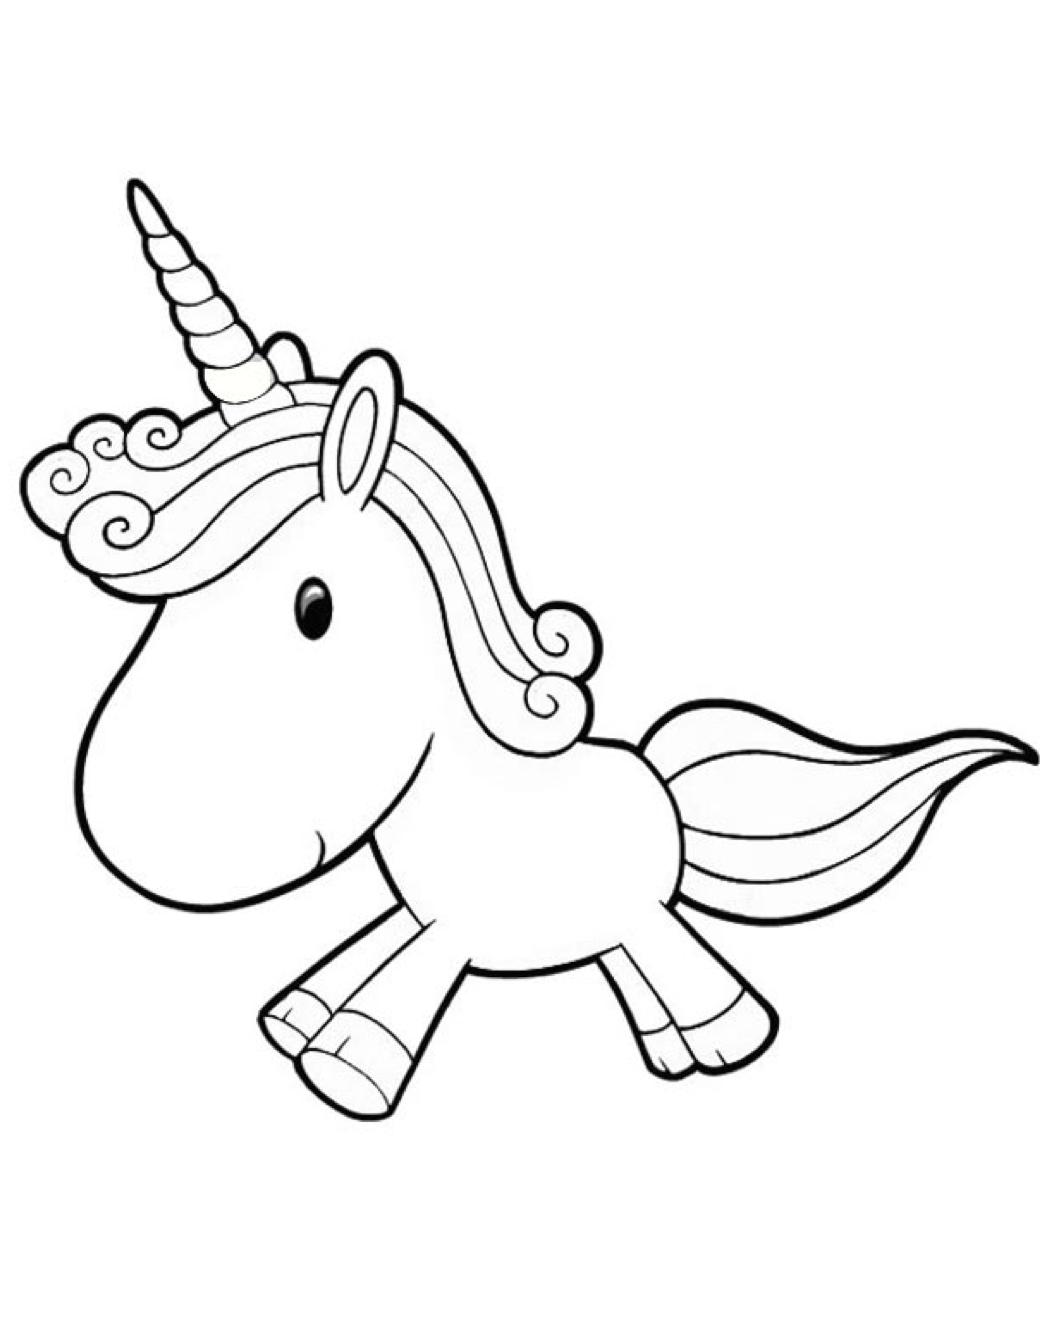 Unicorno Coloring Pages Cartoon Unicorn Coloring Page Coloring Page Book For Kids